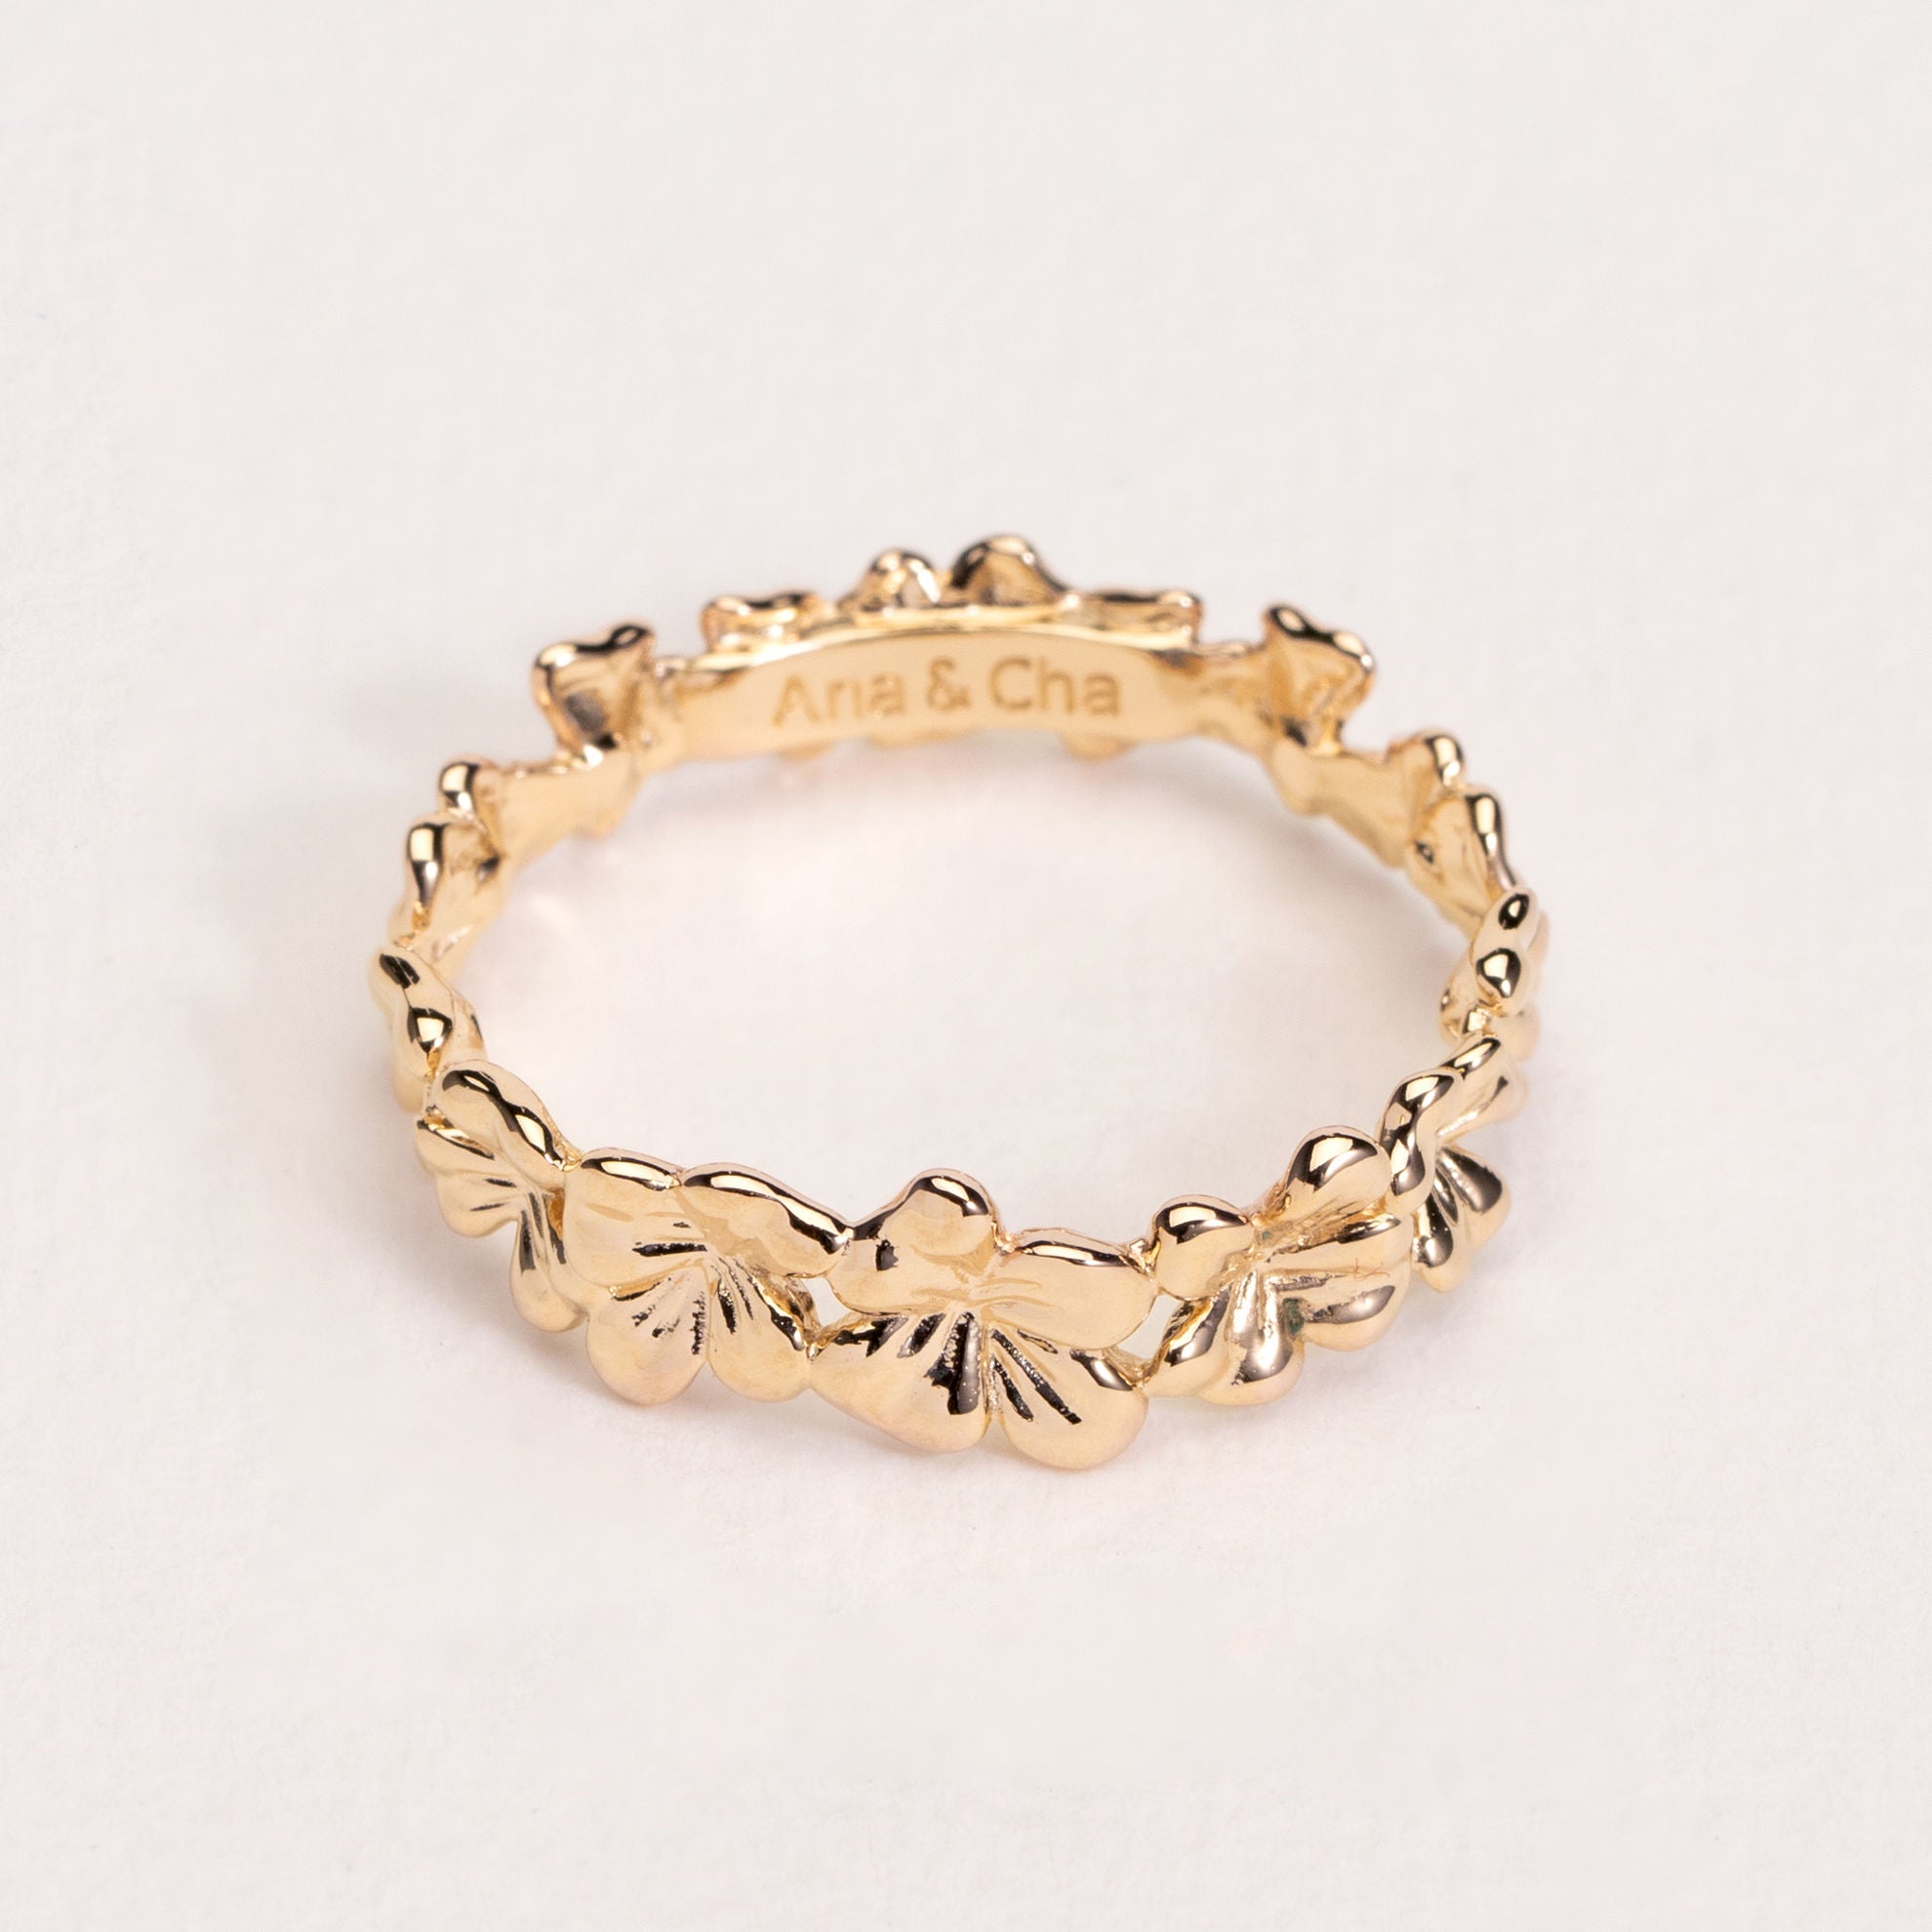 Romane - Gold Plated Ring - Ana and Cha